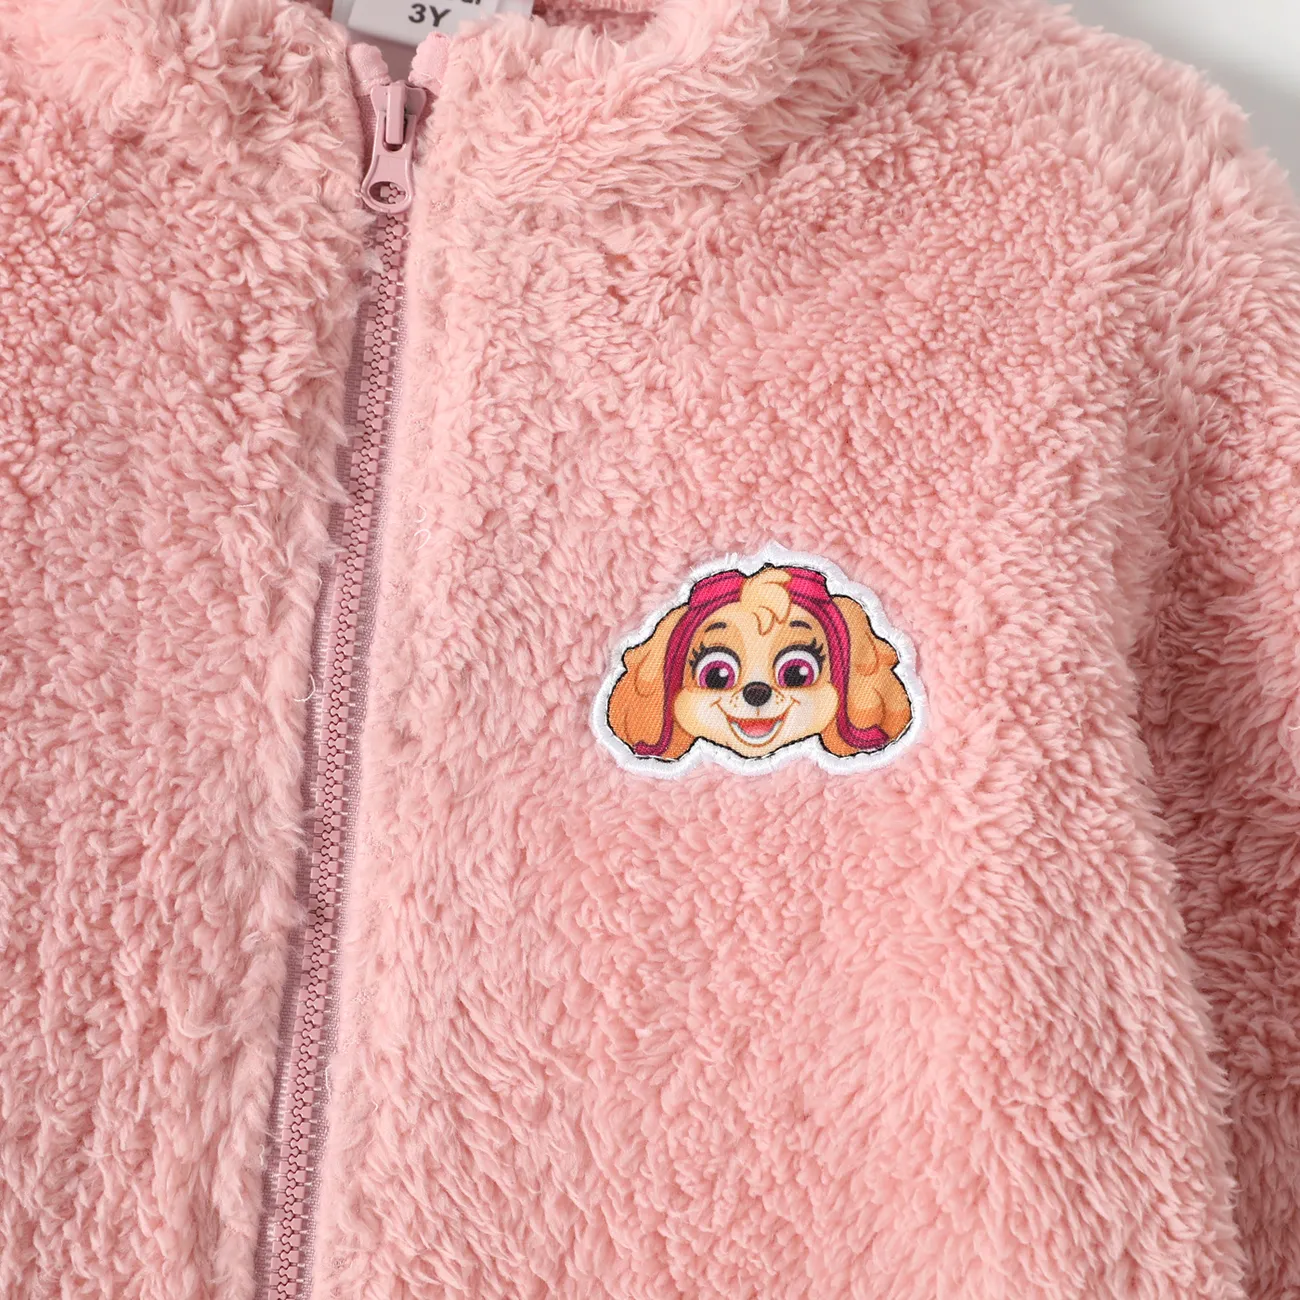 PAW Patrol Toddler Girl/Boy Patch Embroidered Fuzzy Fleece Jacket Pink big image 1